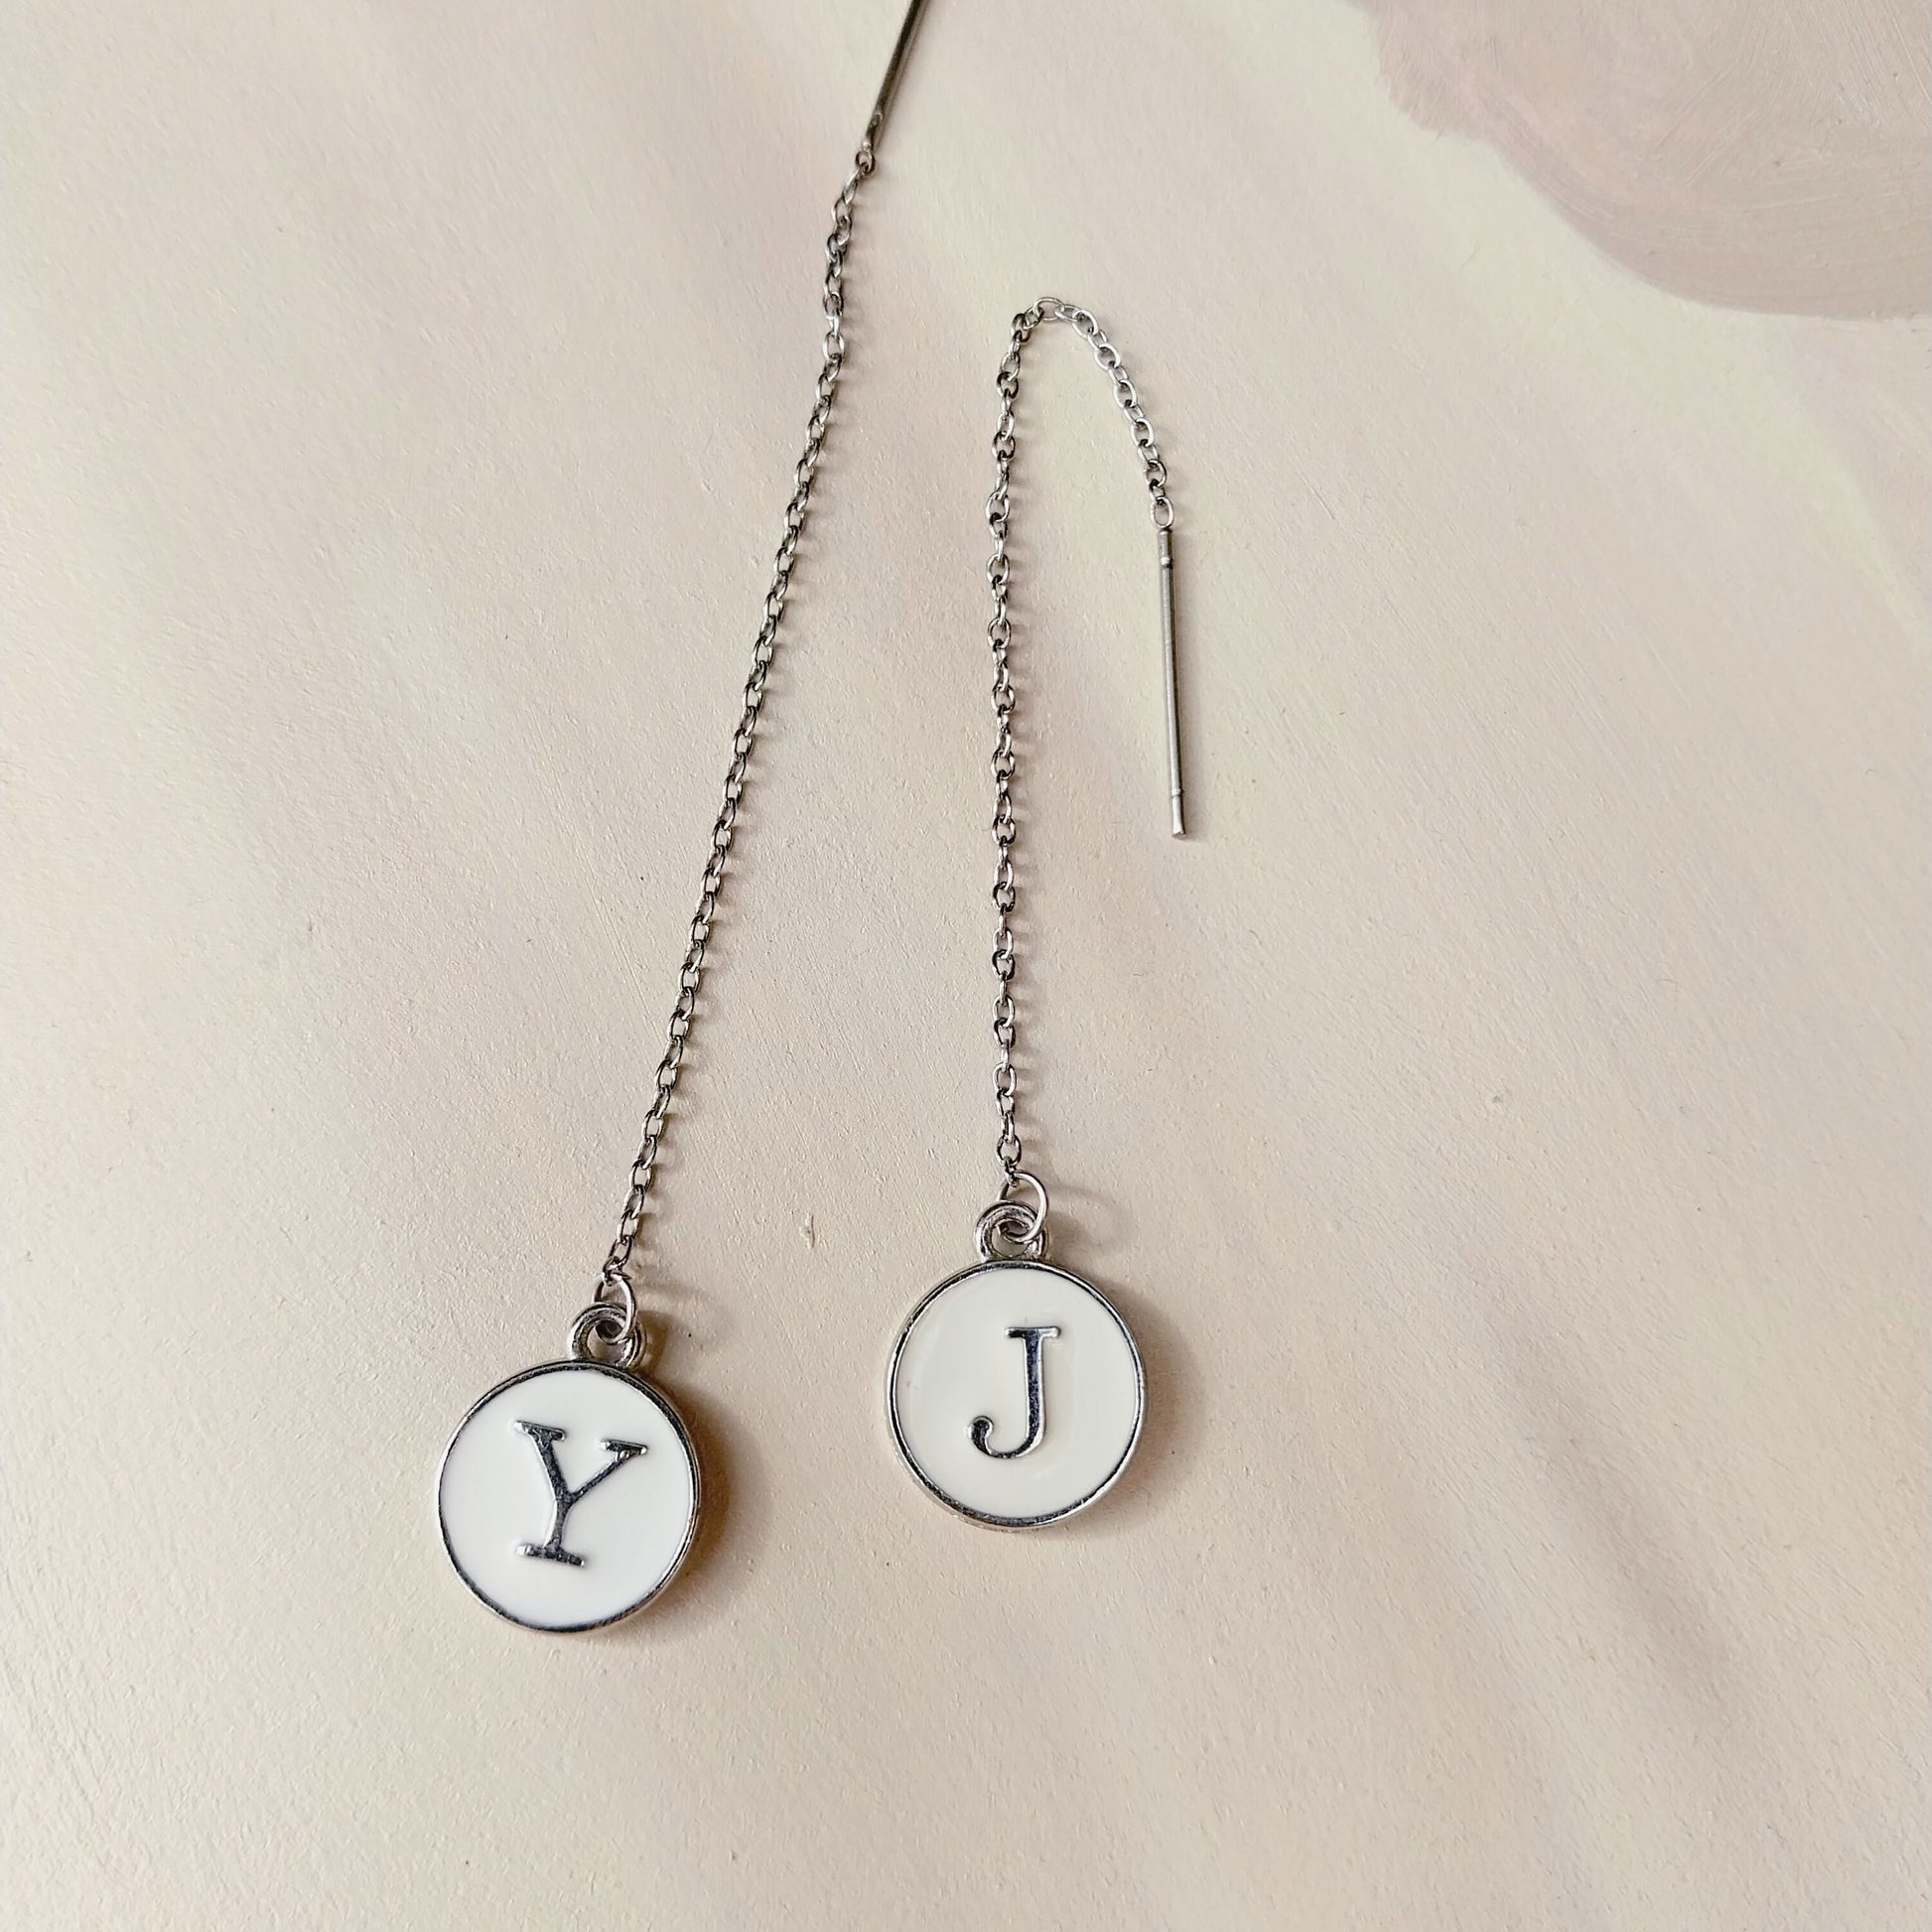 Personalised White Initial Threader Earrings in Silver personalized circle drop letter accessories jewellery name gift stainless steel